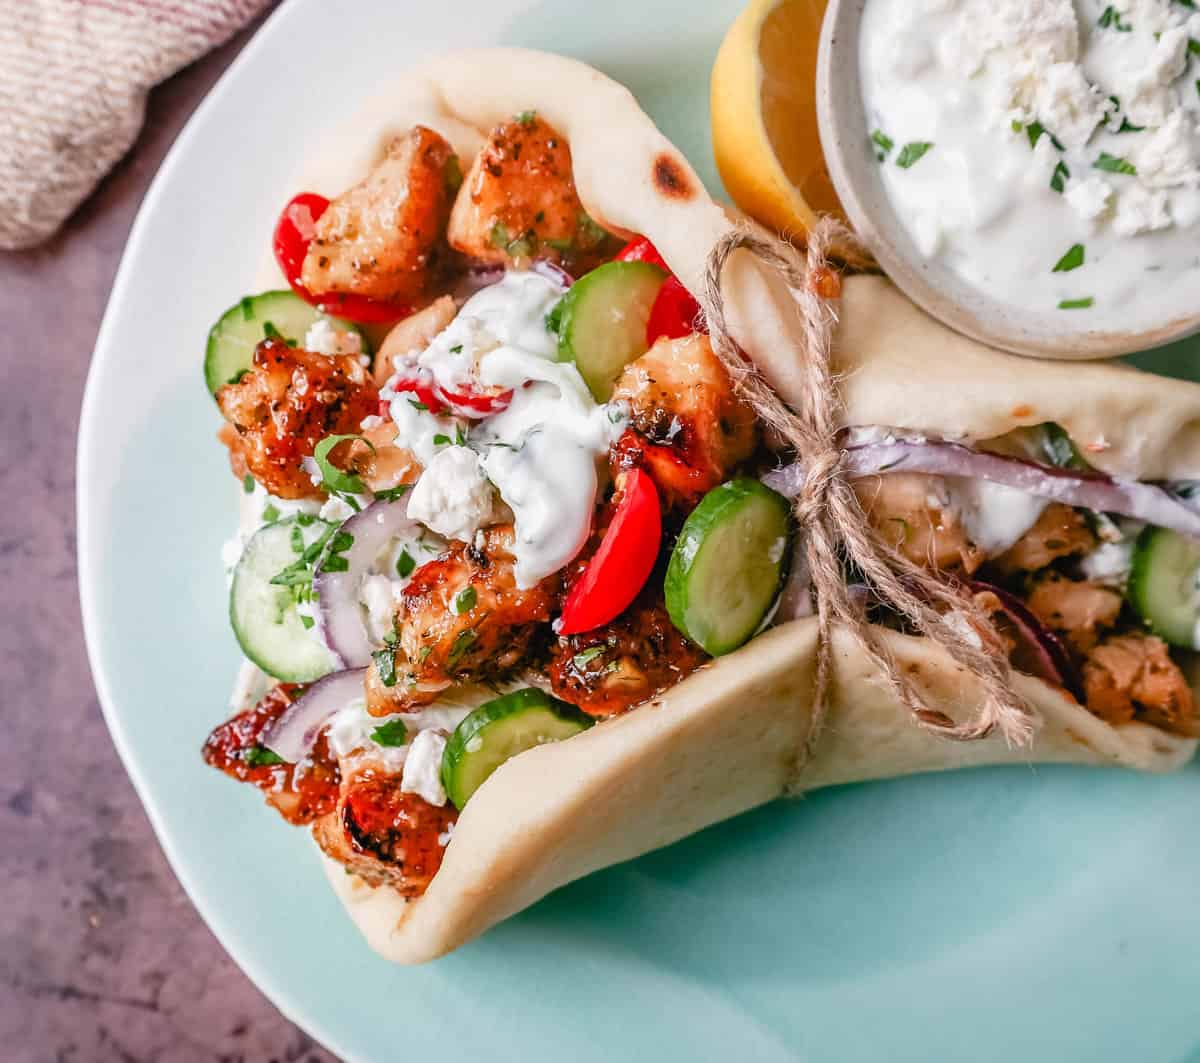 Greek Chicken Gyros with Tzatziki Sauce. How to make the best chicken gyros at home.